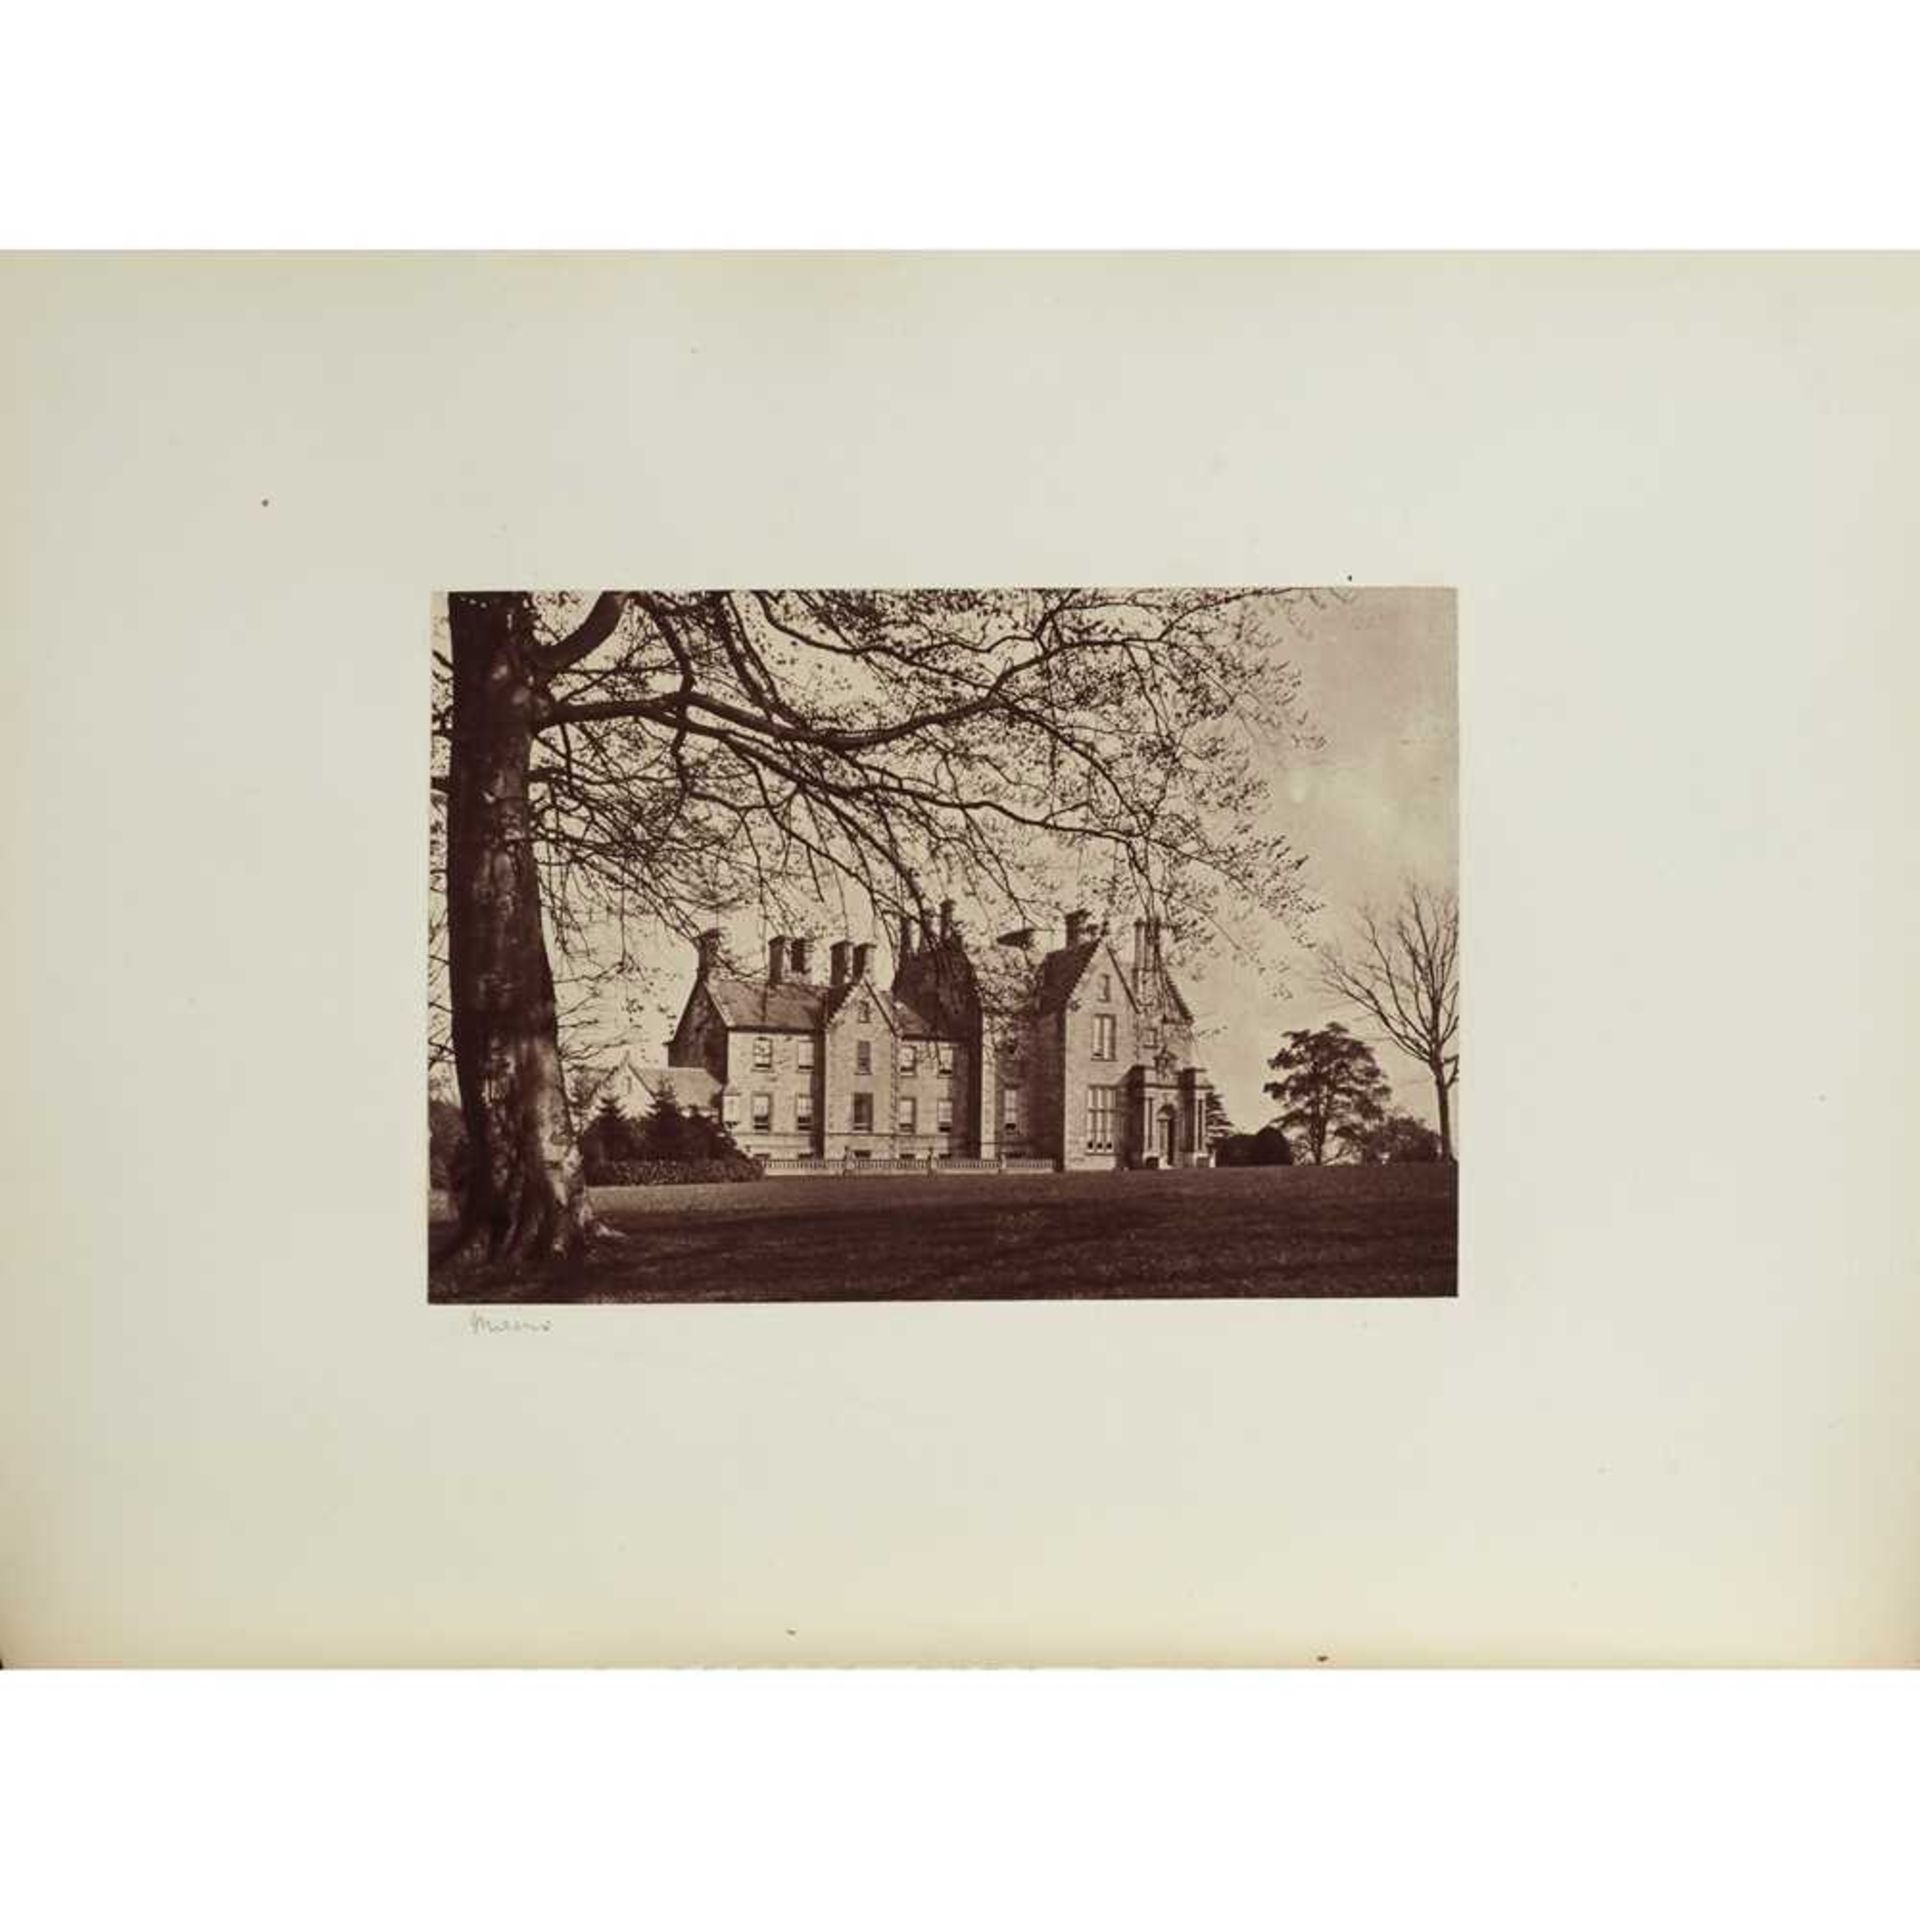 Annan, Thomas, Photographer The Old Country Houses of the Old Glasgow Gentry - Image 2 of 2